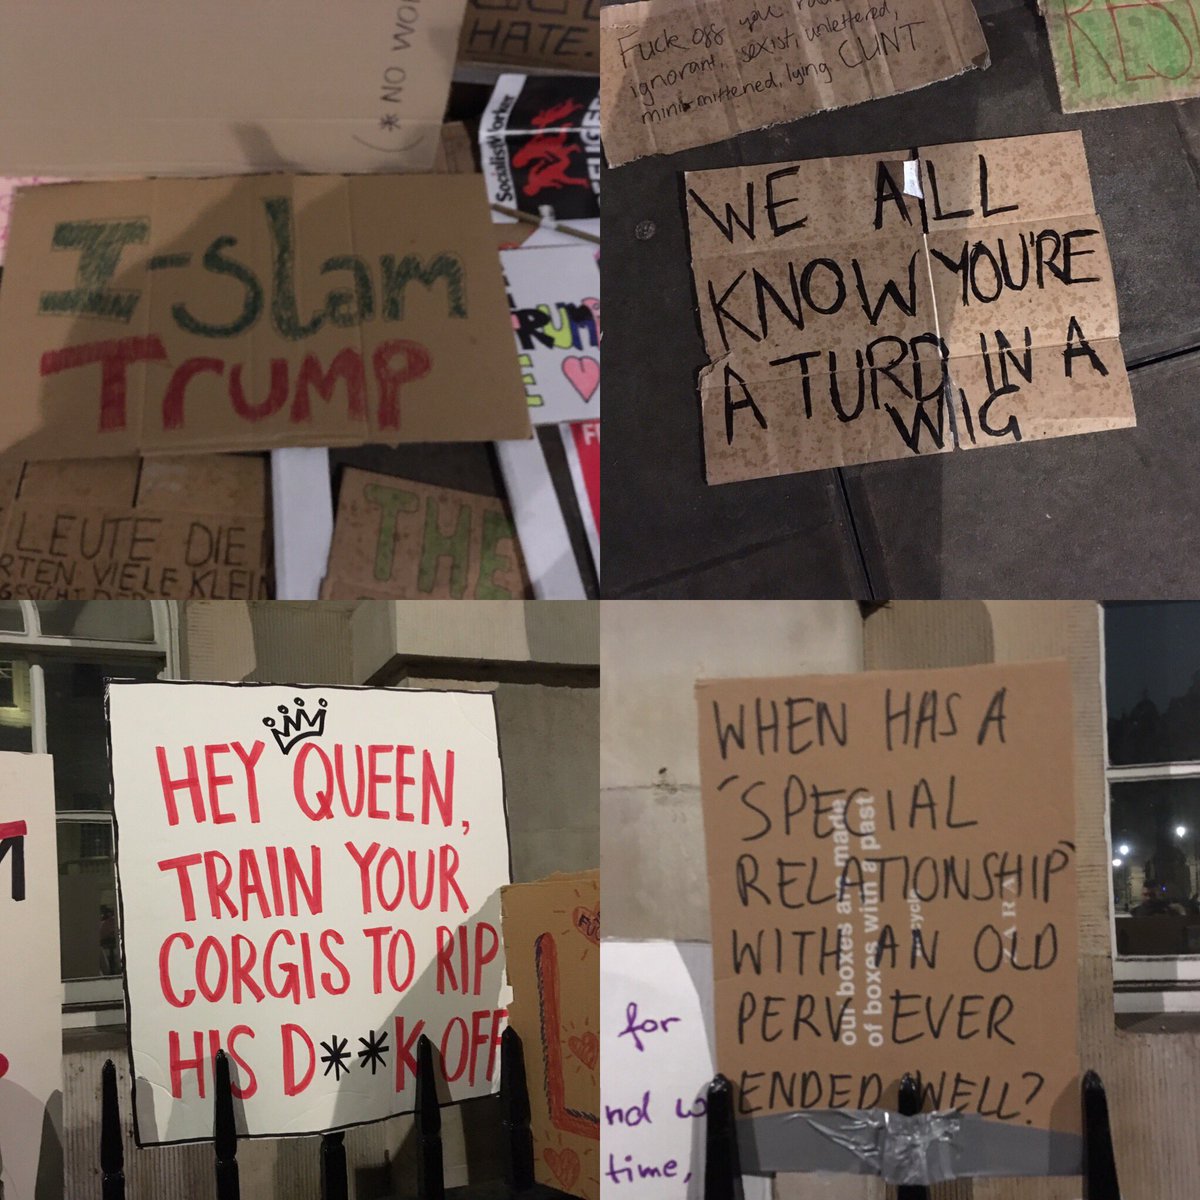 Highlights from the March on #number10downingstreet #DumpTrump